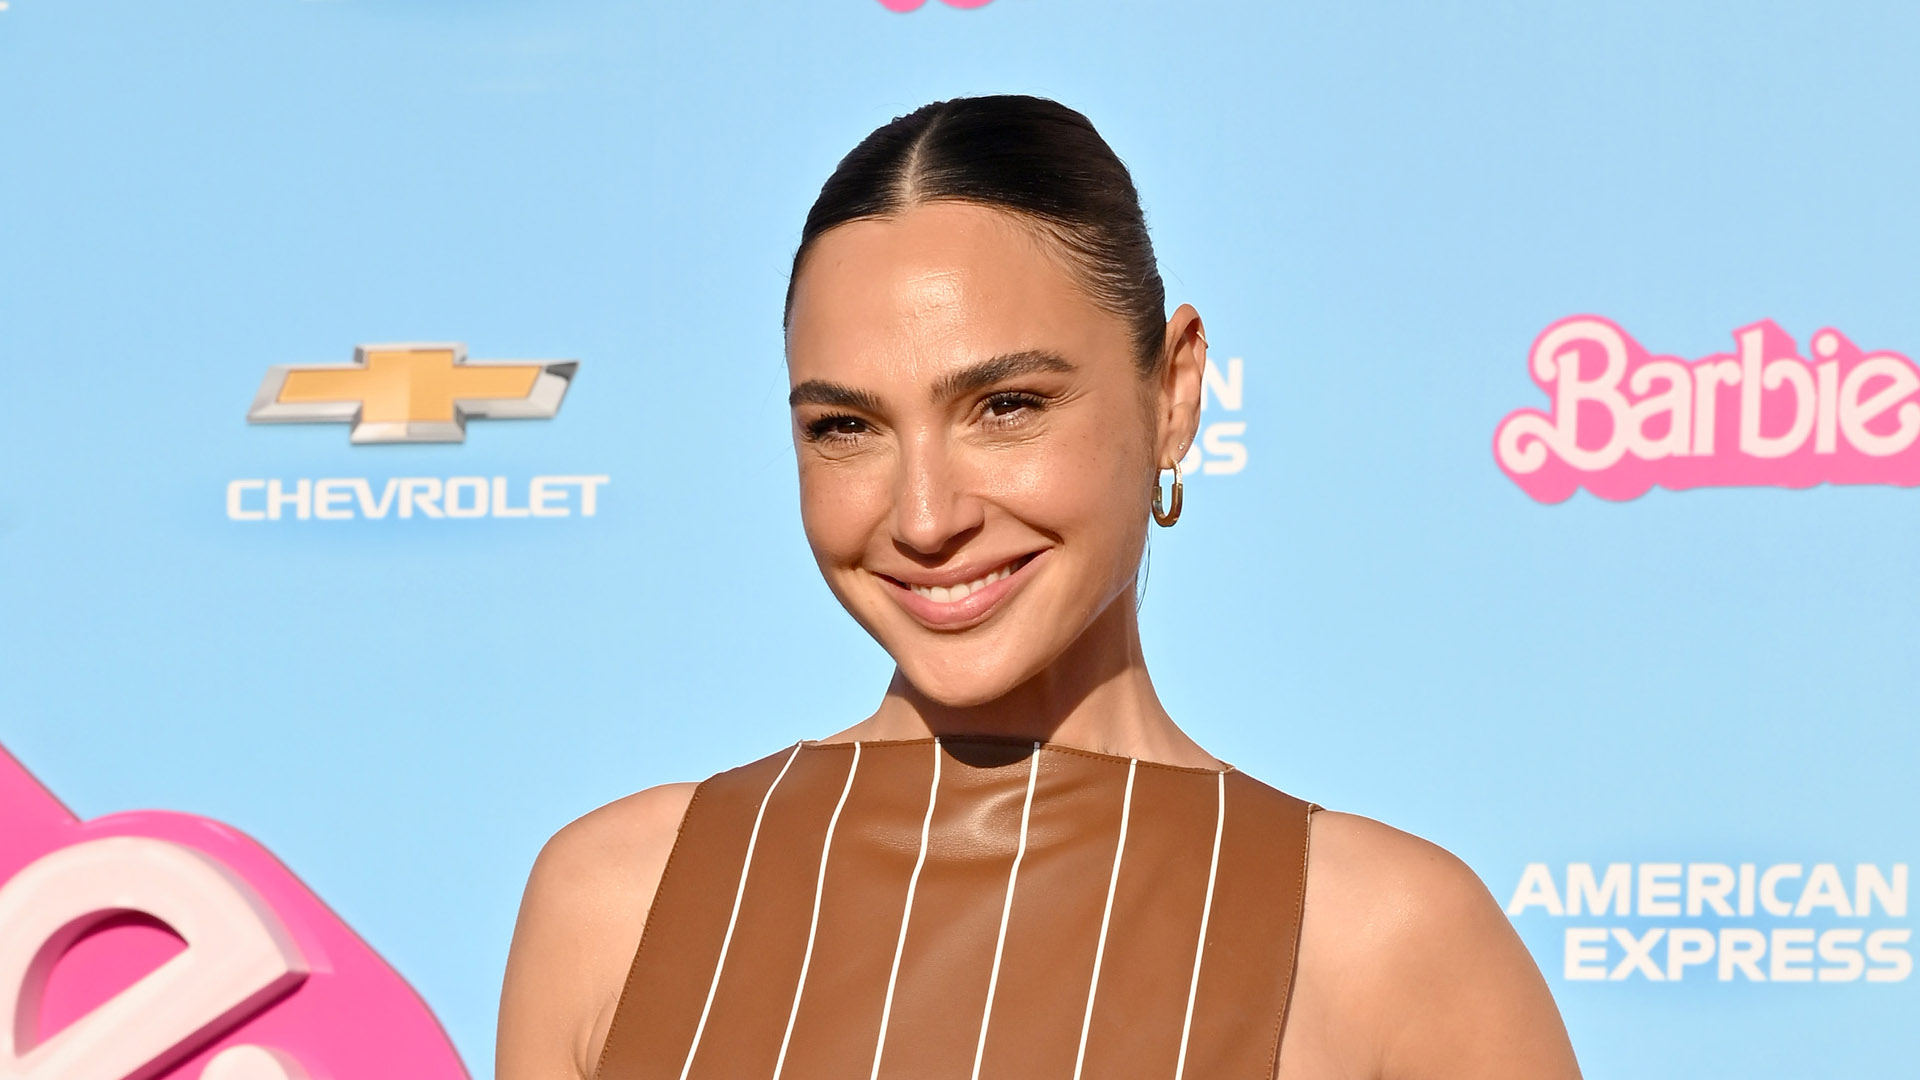 Gal Gadot welcomes fourth child with husband Yaron Varsano as she reveals unique name and first photo of baby